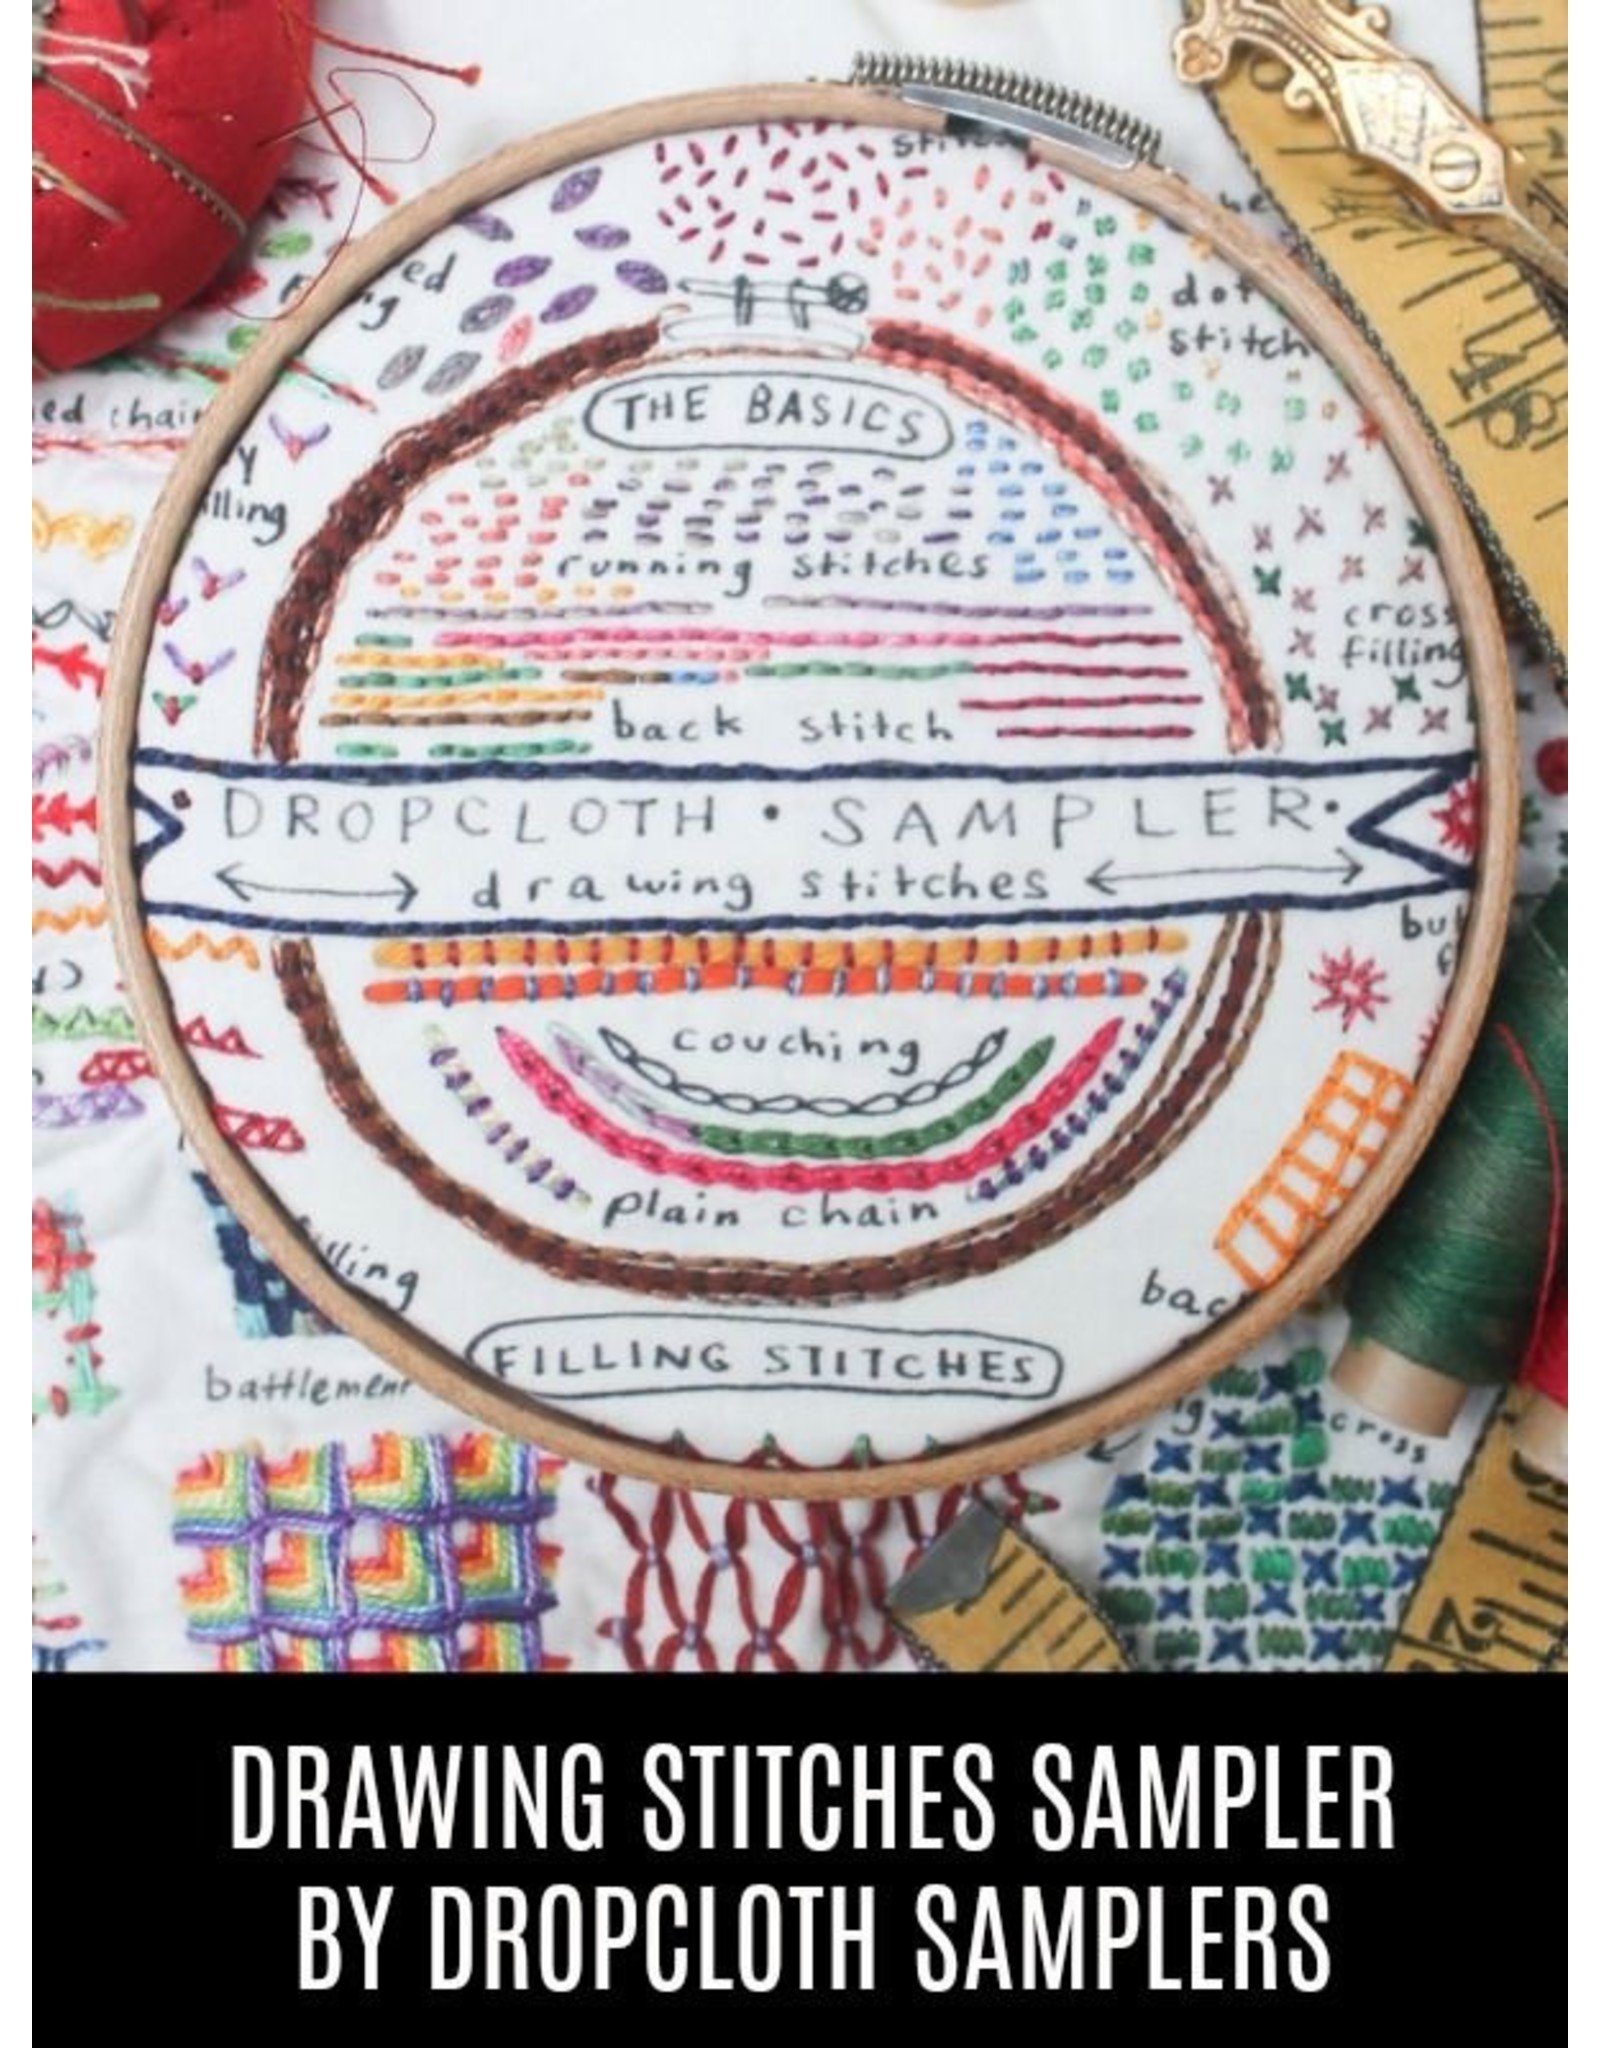 Dropcloth Samplers Drawing Stitches Sampler, Embroidery Sampler